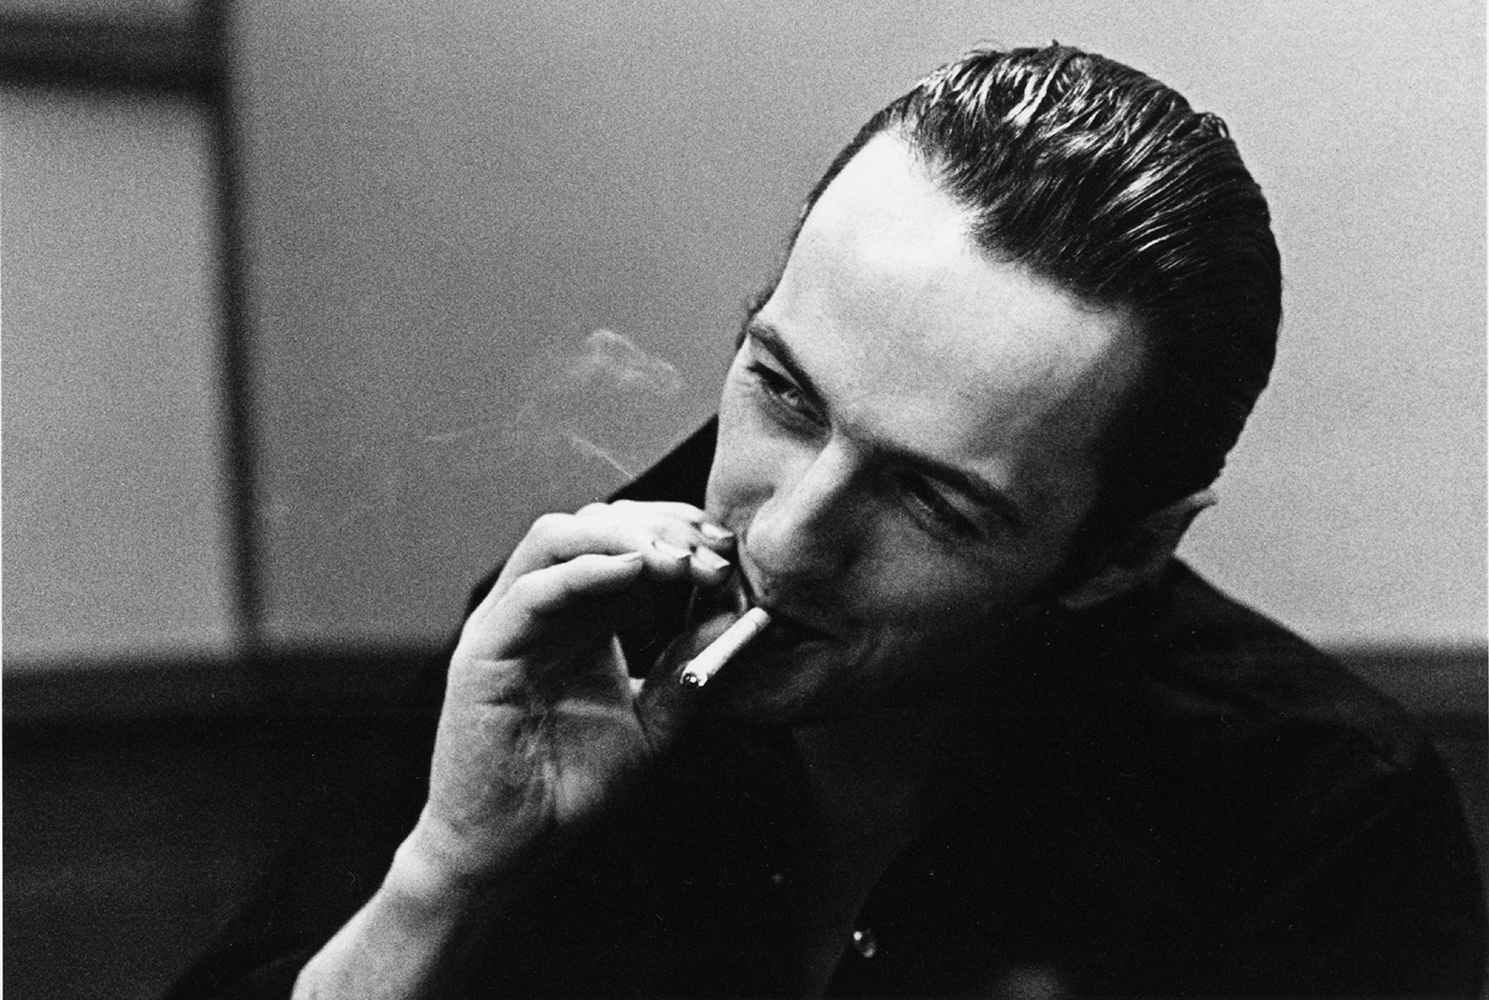 joe strummer the future is unwritten, one person, real people